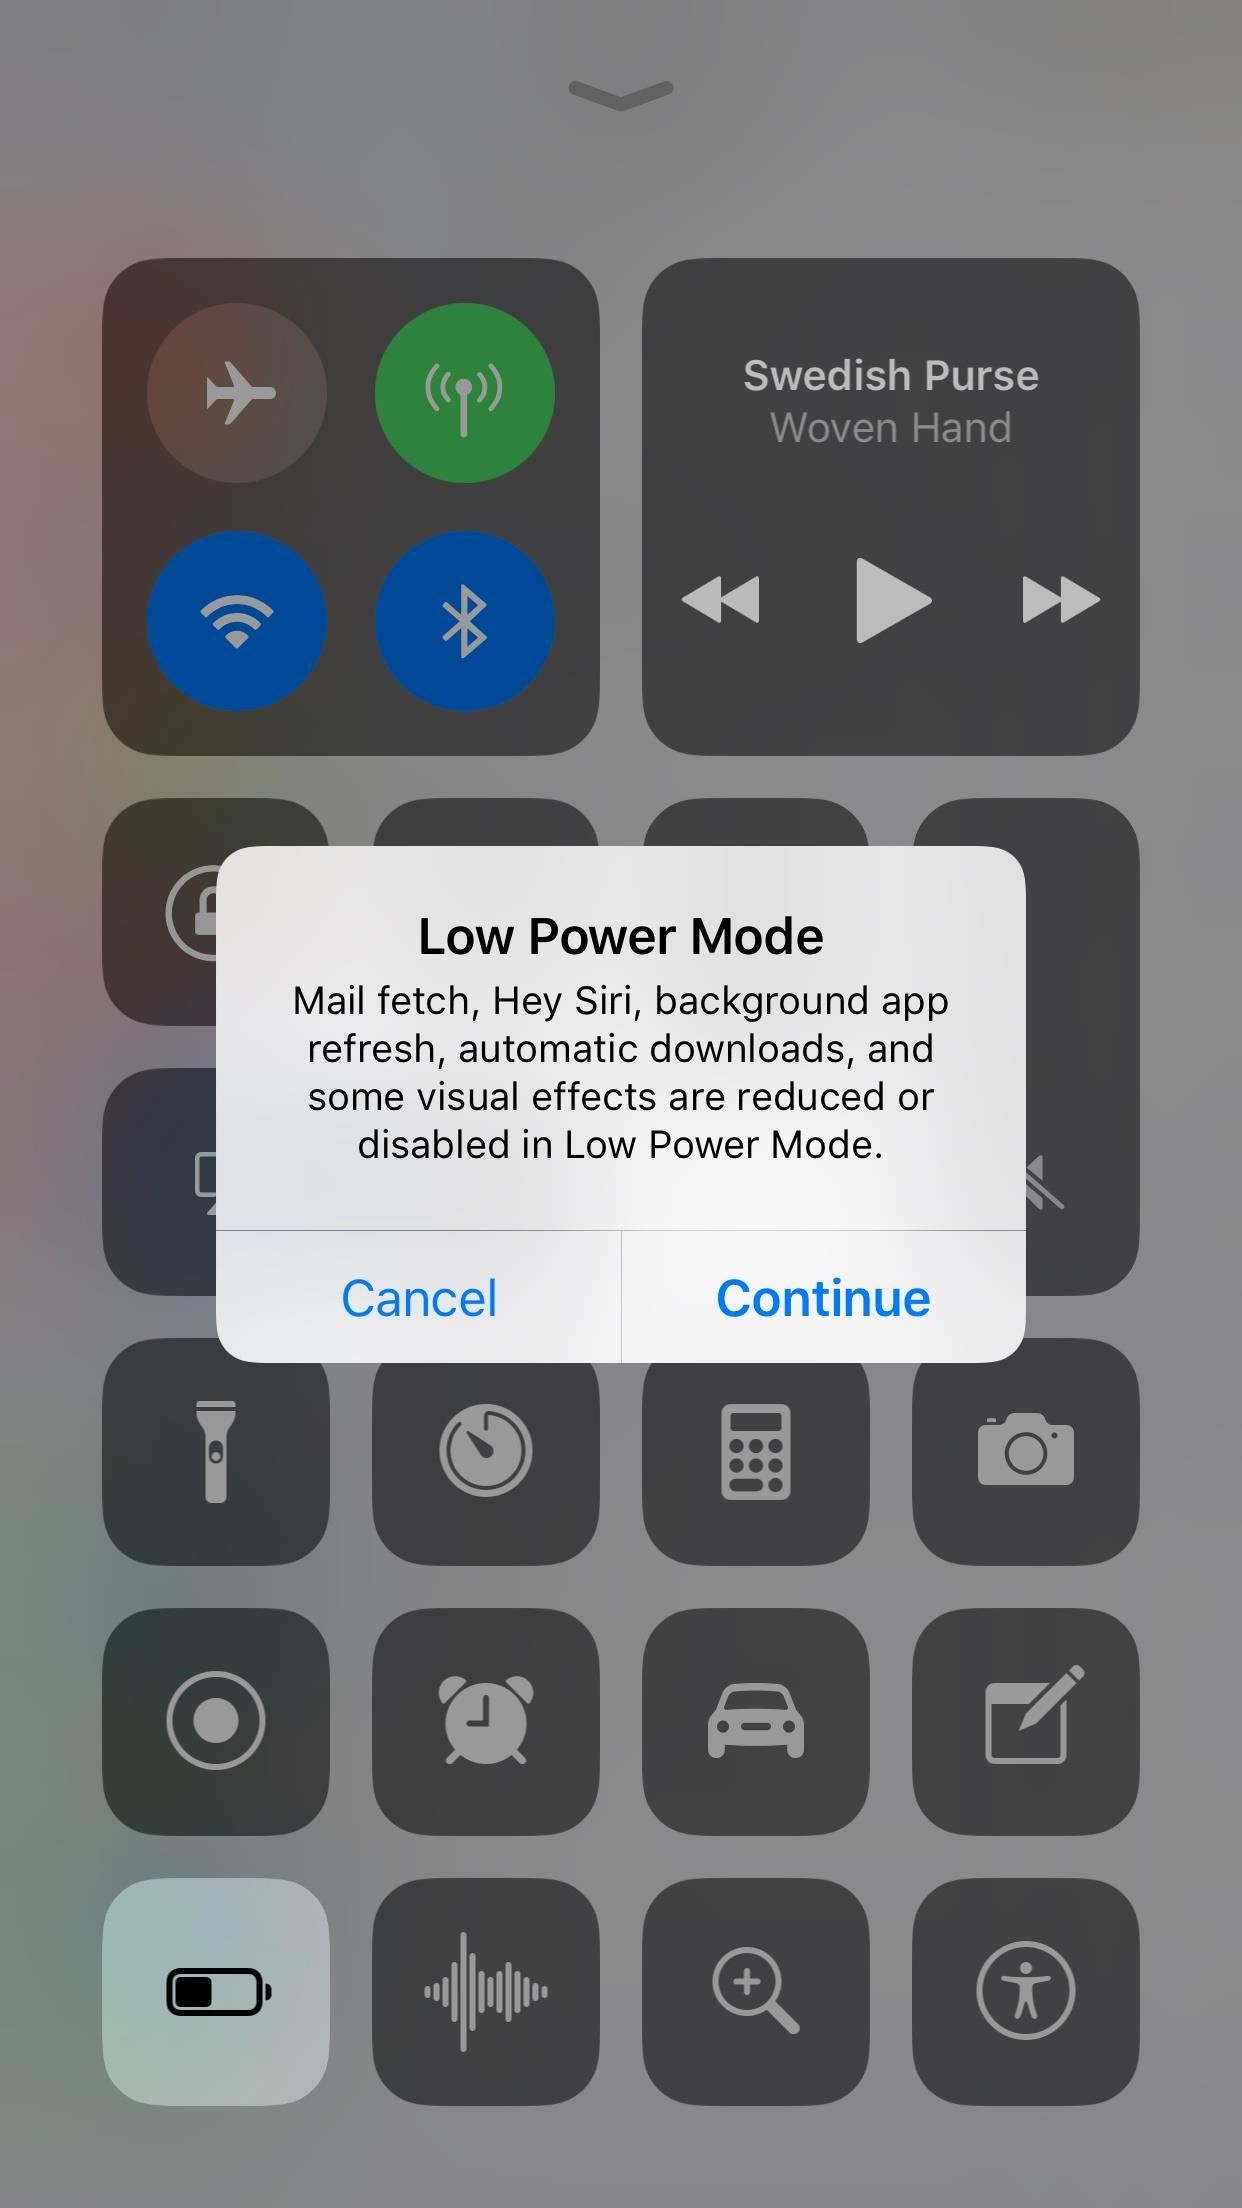 How to Improve Battery Life on Your iPhone in iOS 11